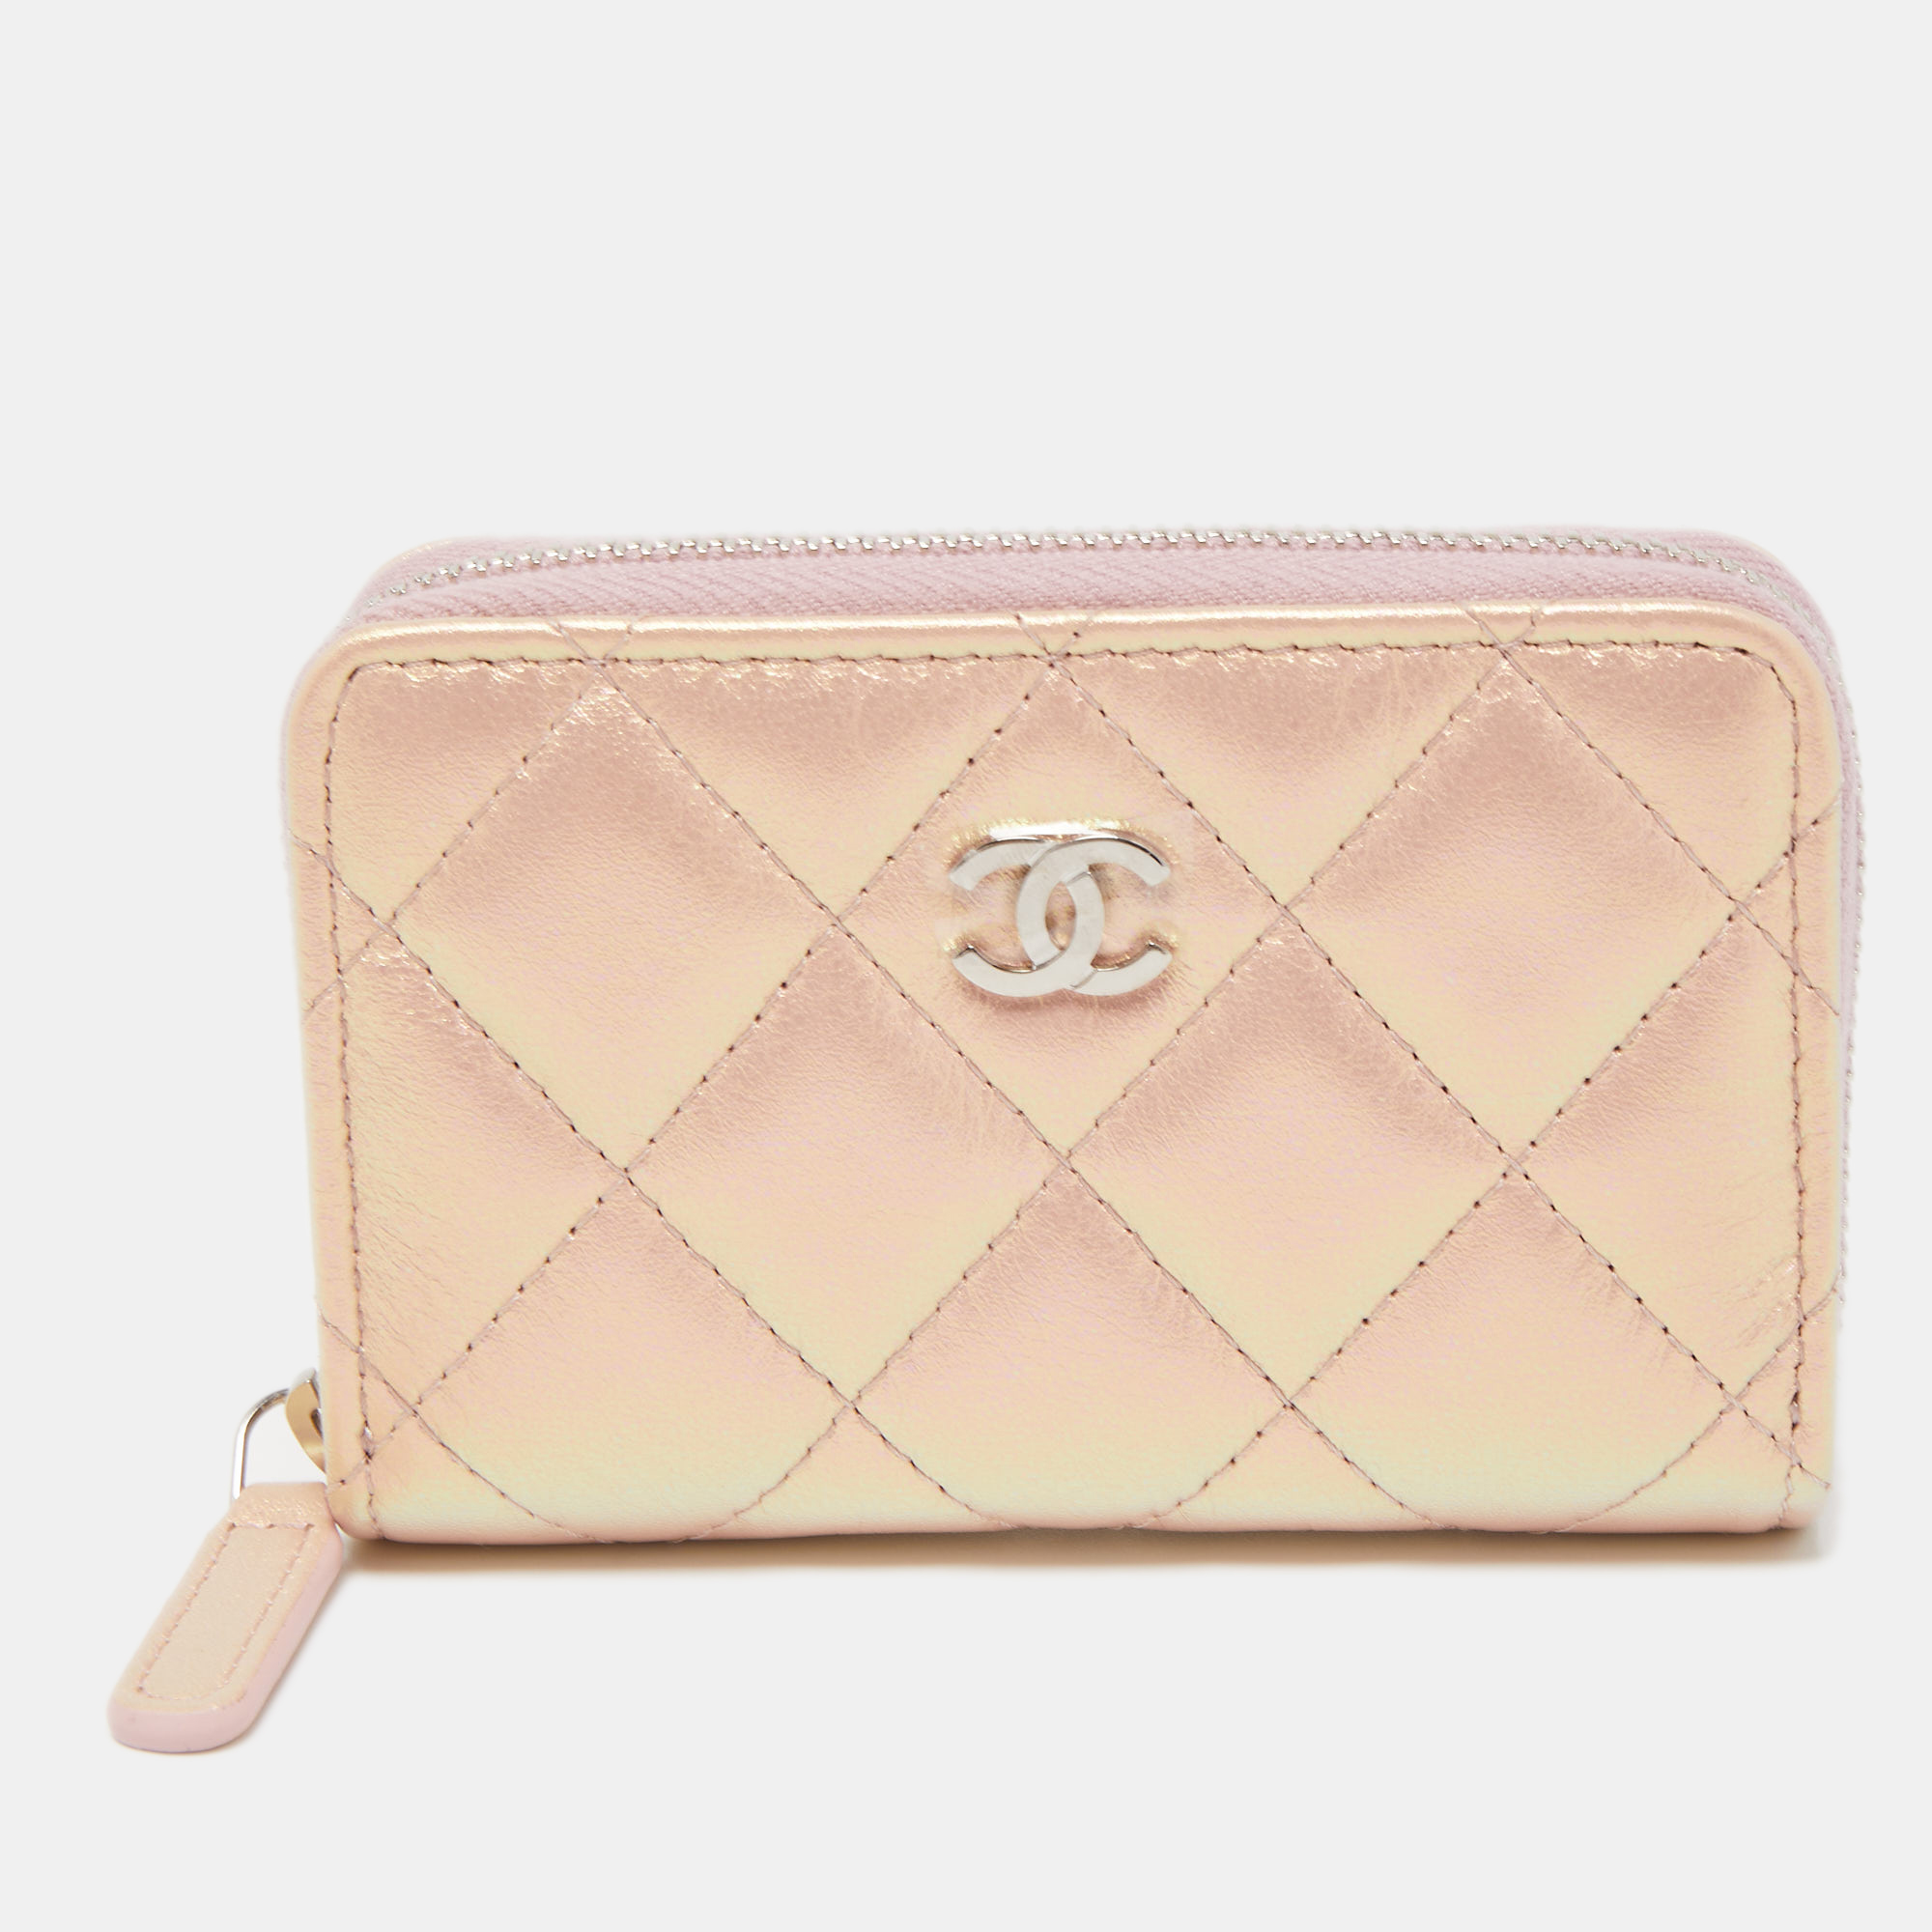 Pre-owned Chanel Pink Quilted Iridescent Leather Cc Zip Coin Purse